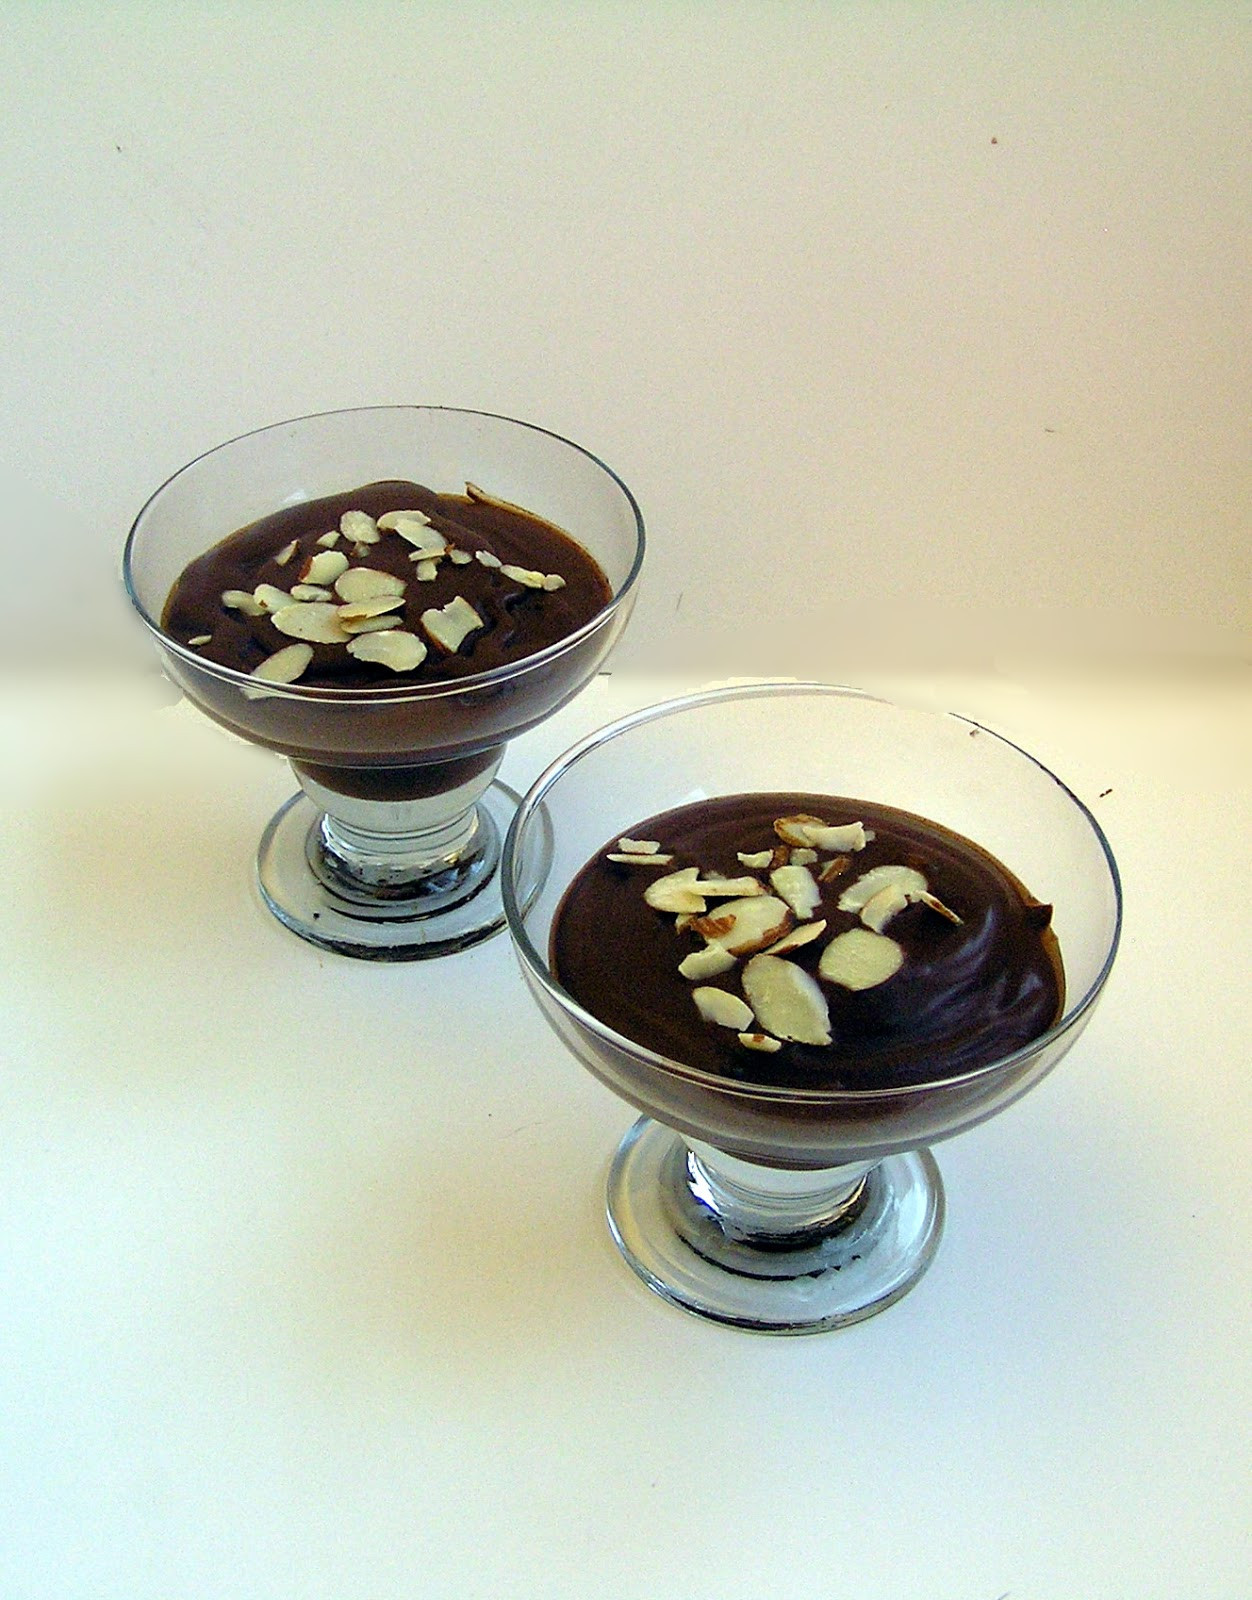 Passover Chocolate Mousse
 Decadent Chocolate Mousse for Passover and Year Round